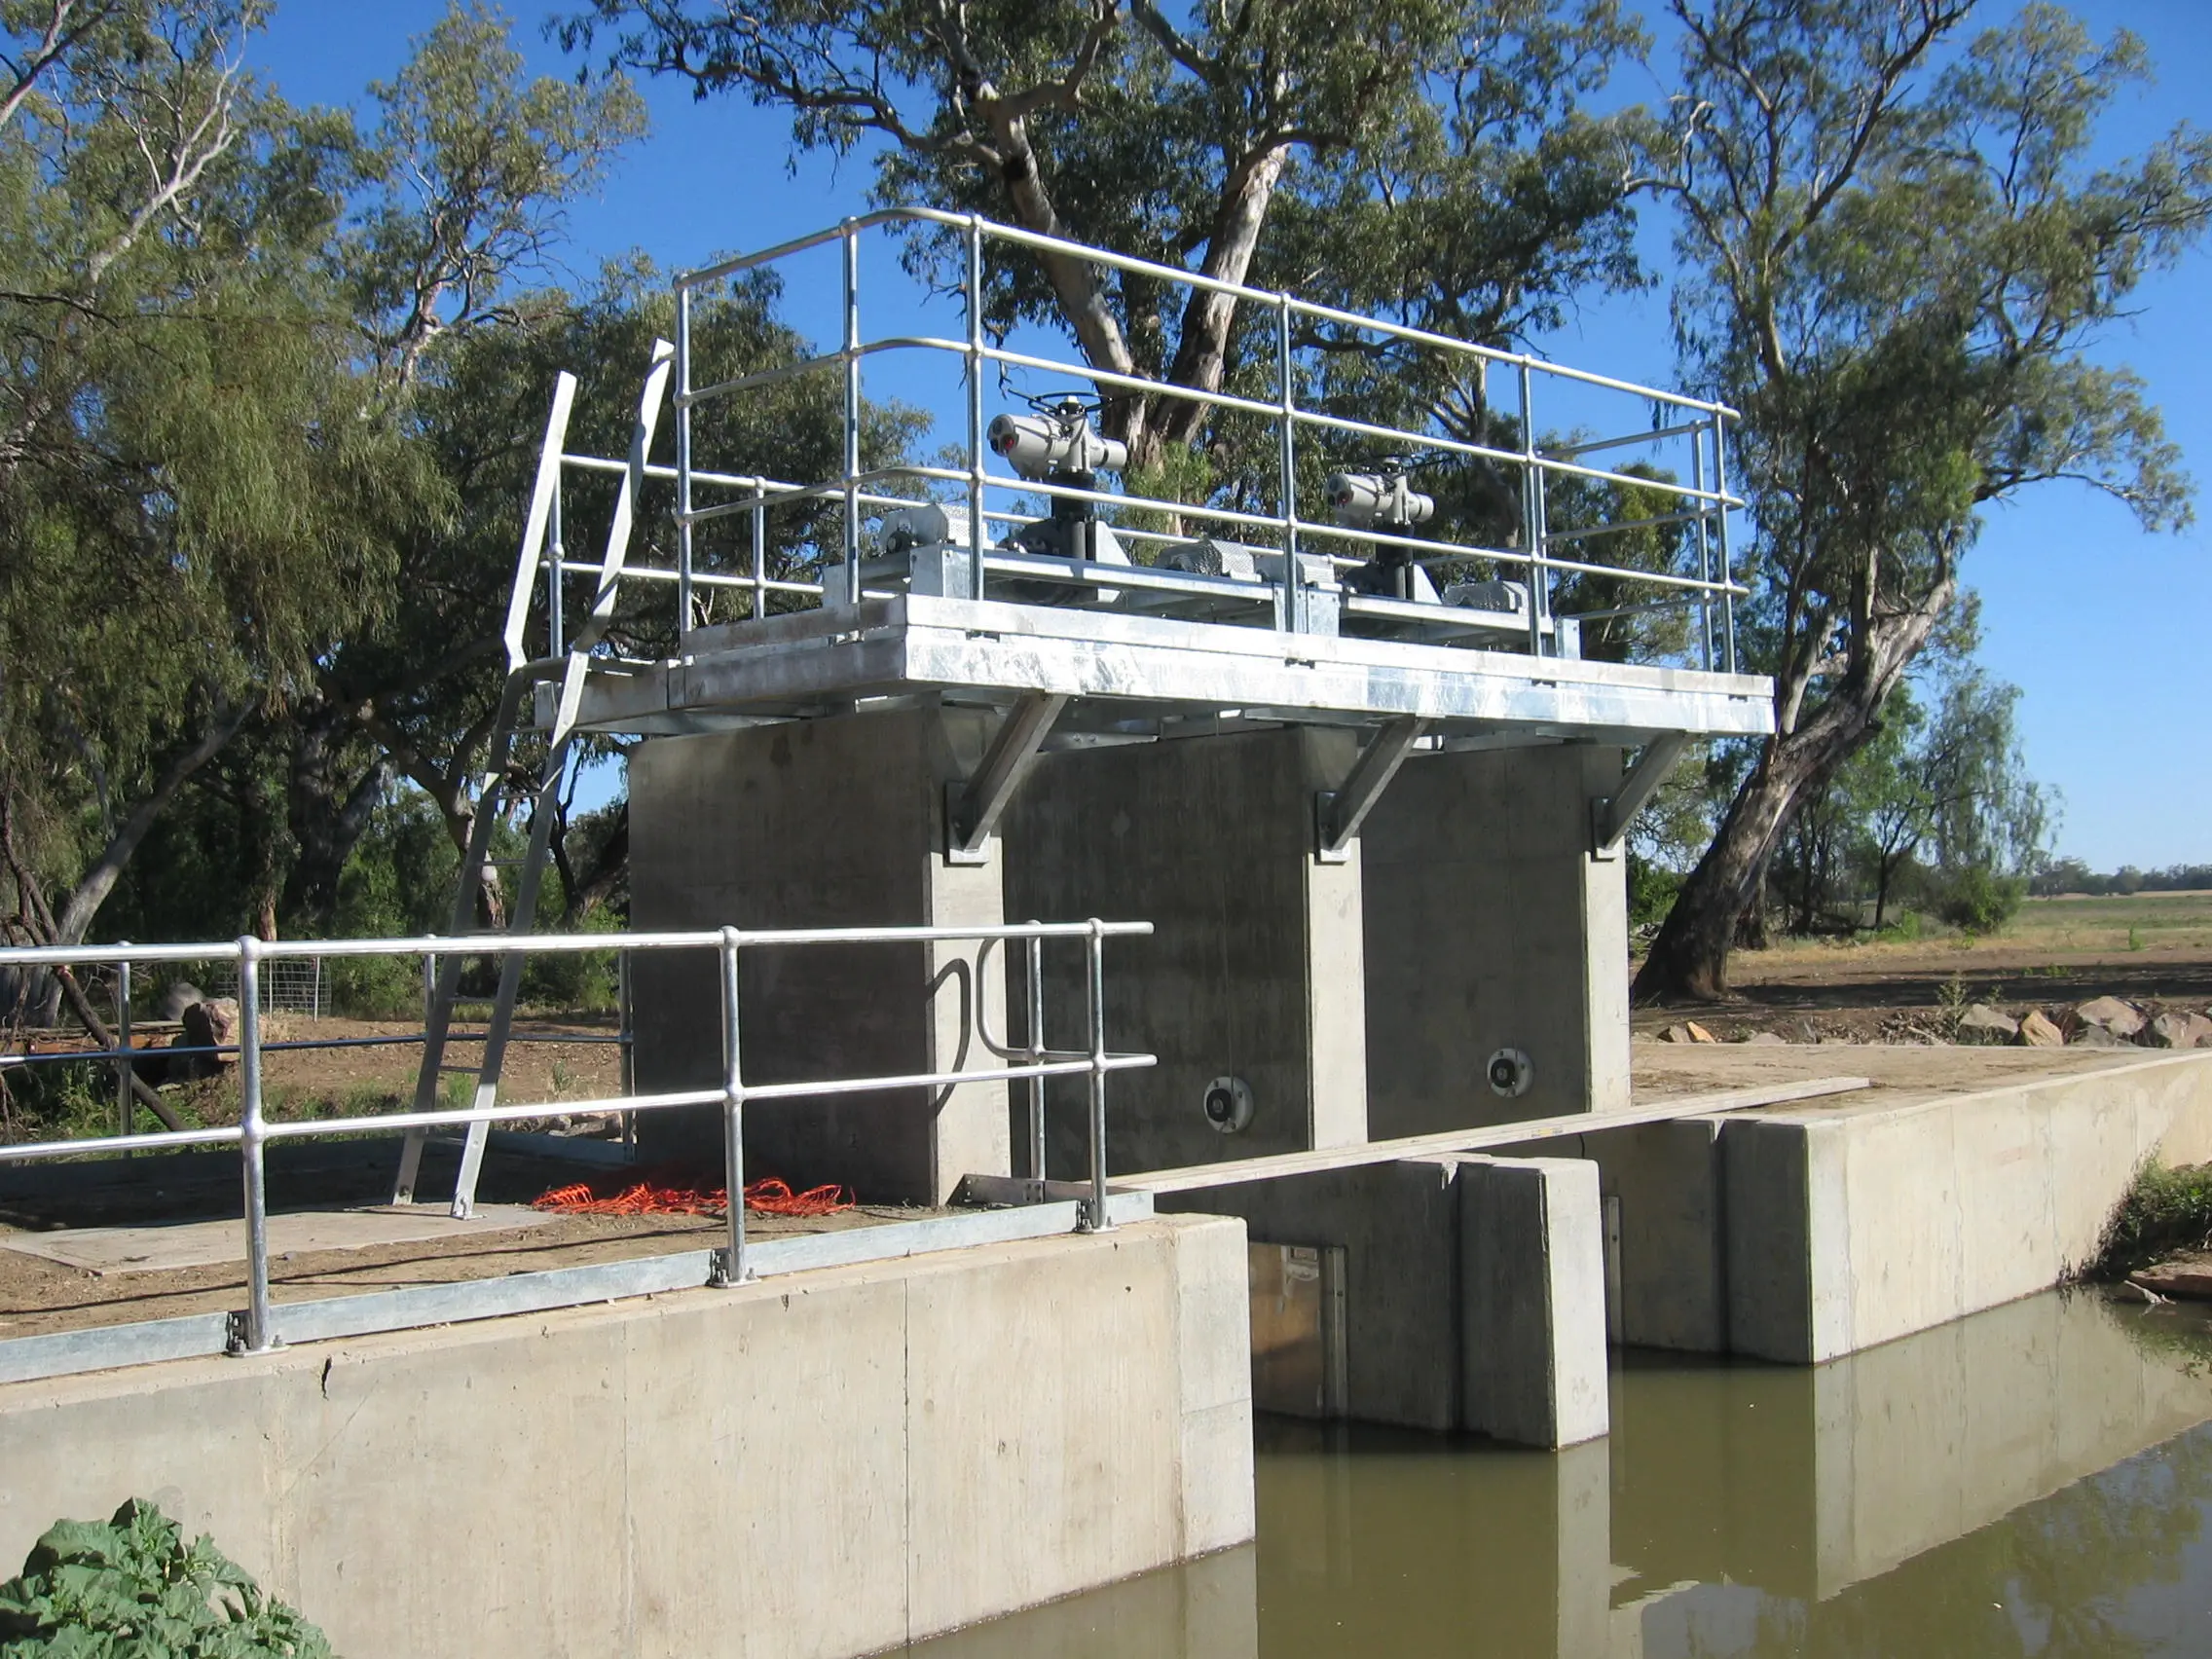 River outfall pumping station